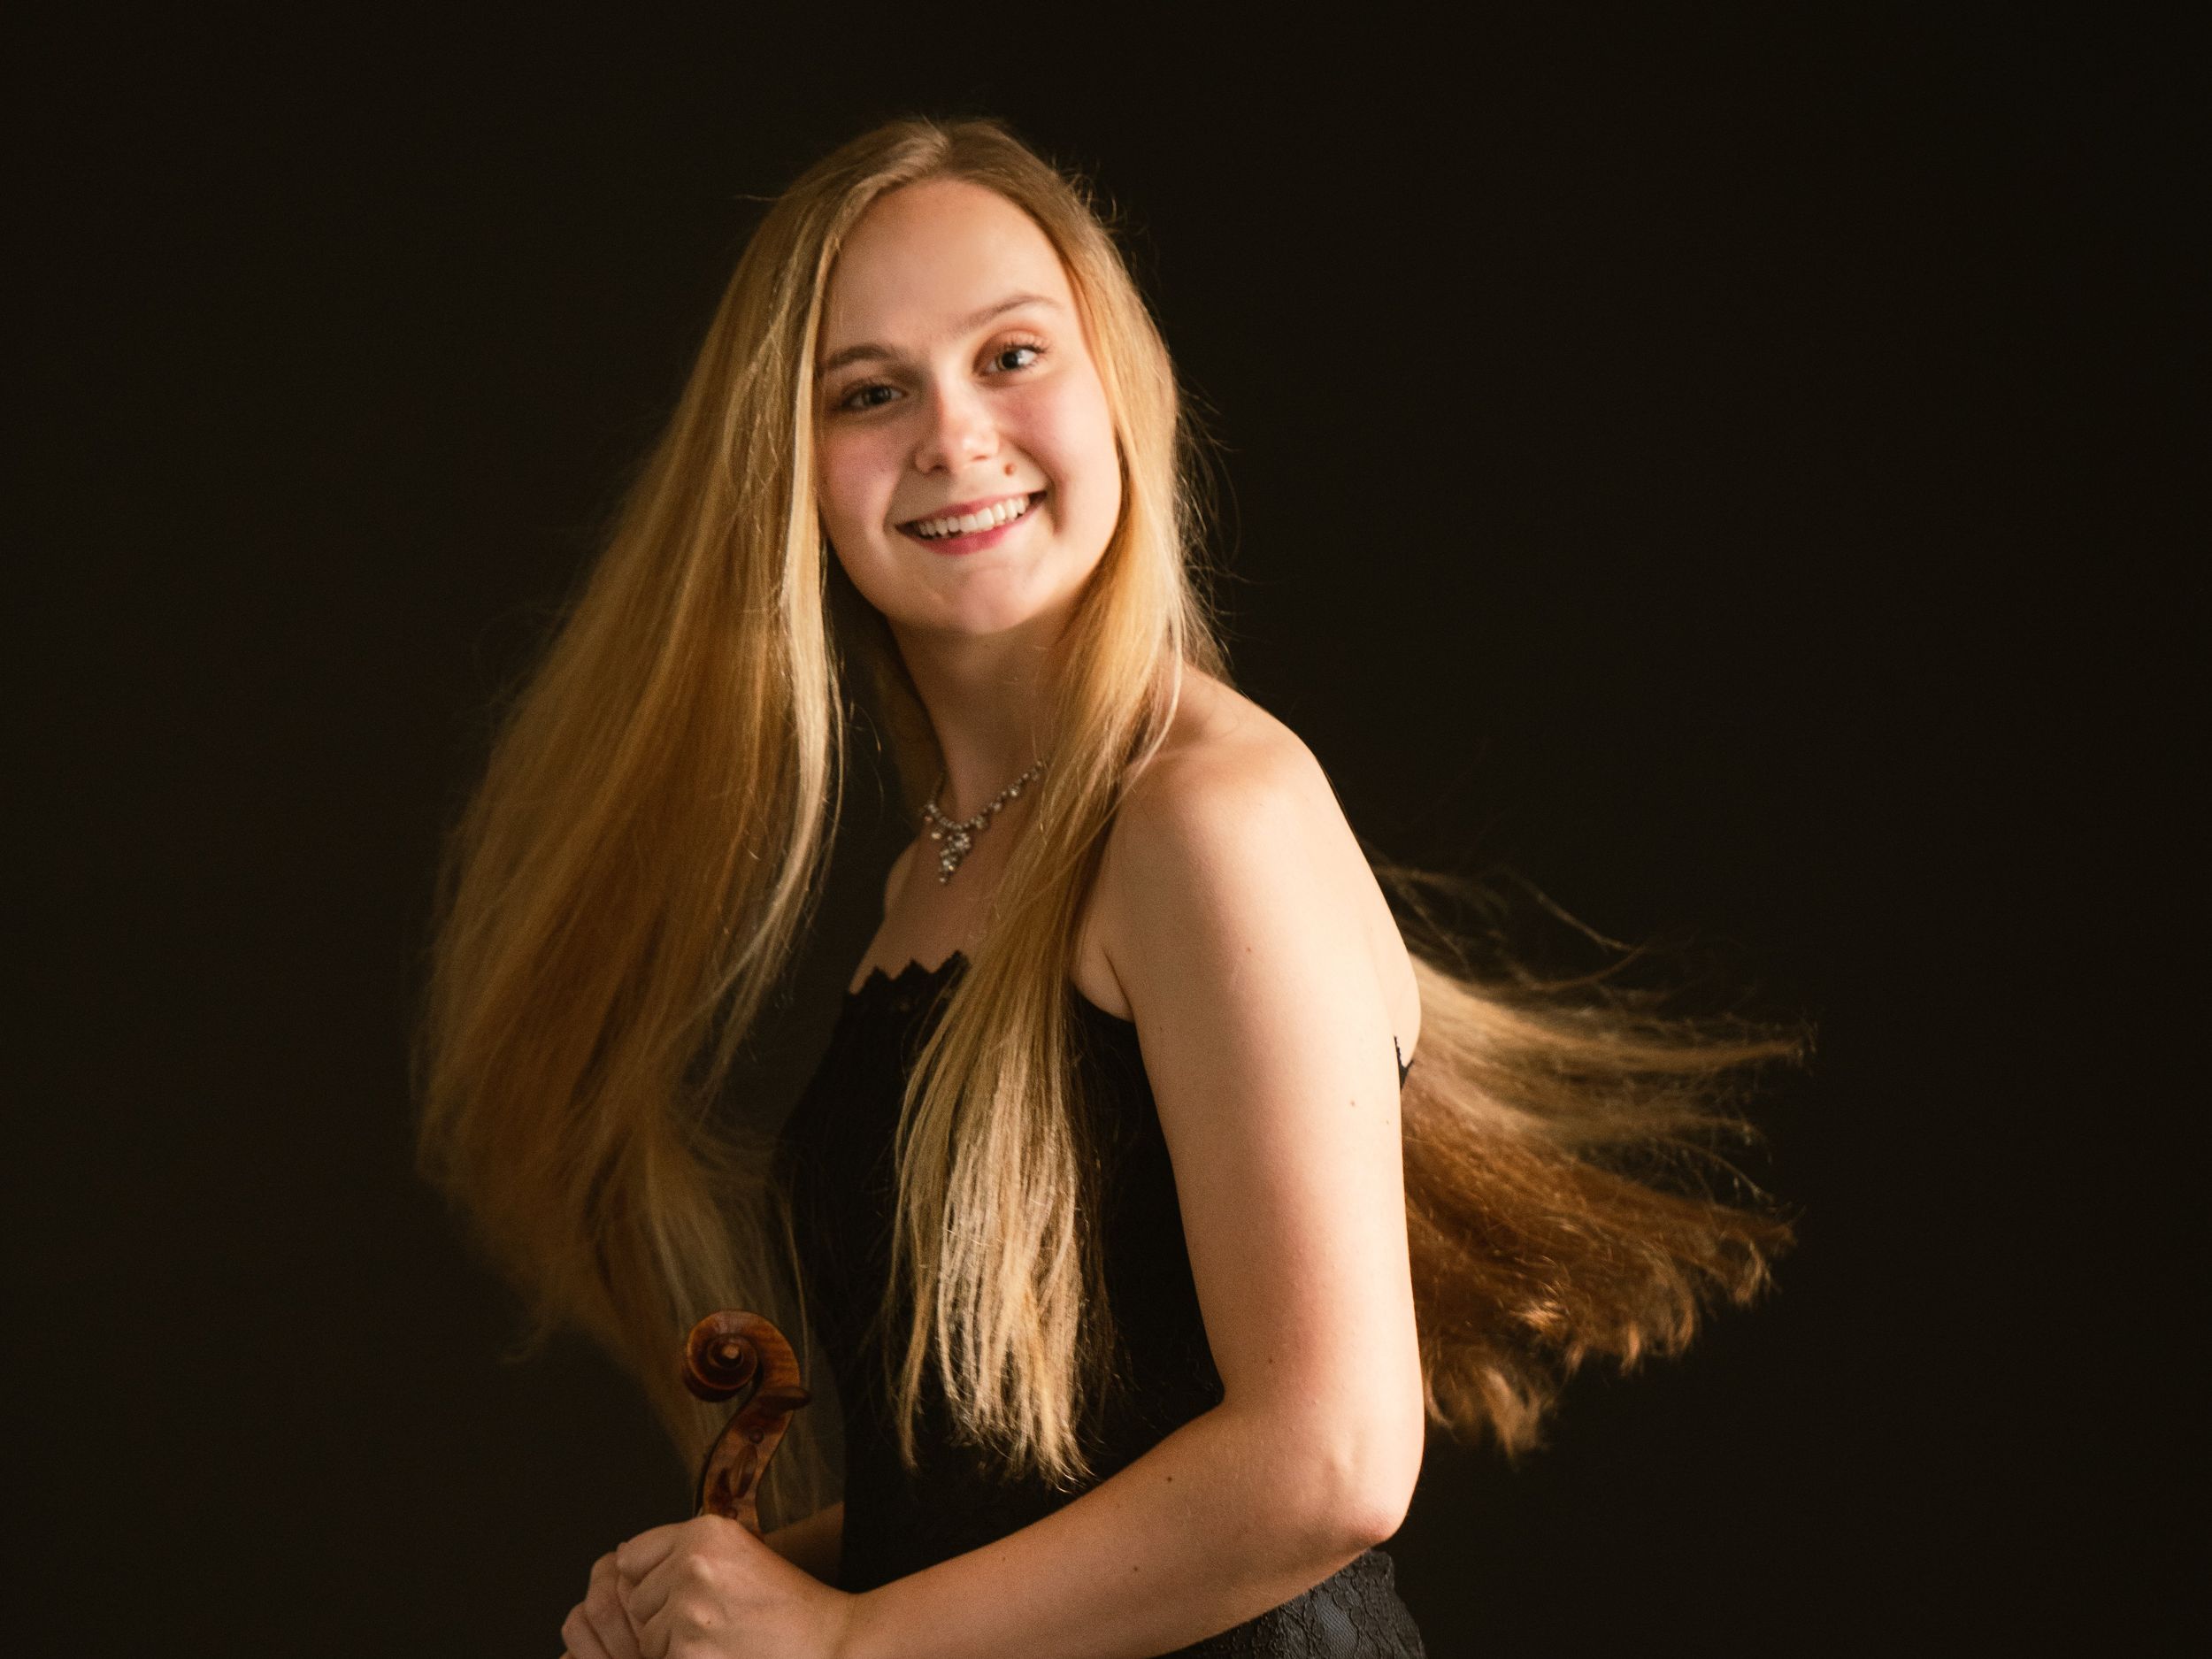 Local violinist Yvette Kraft, 19, to be featured on NPR's 'From